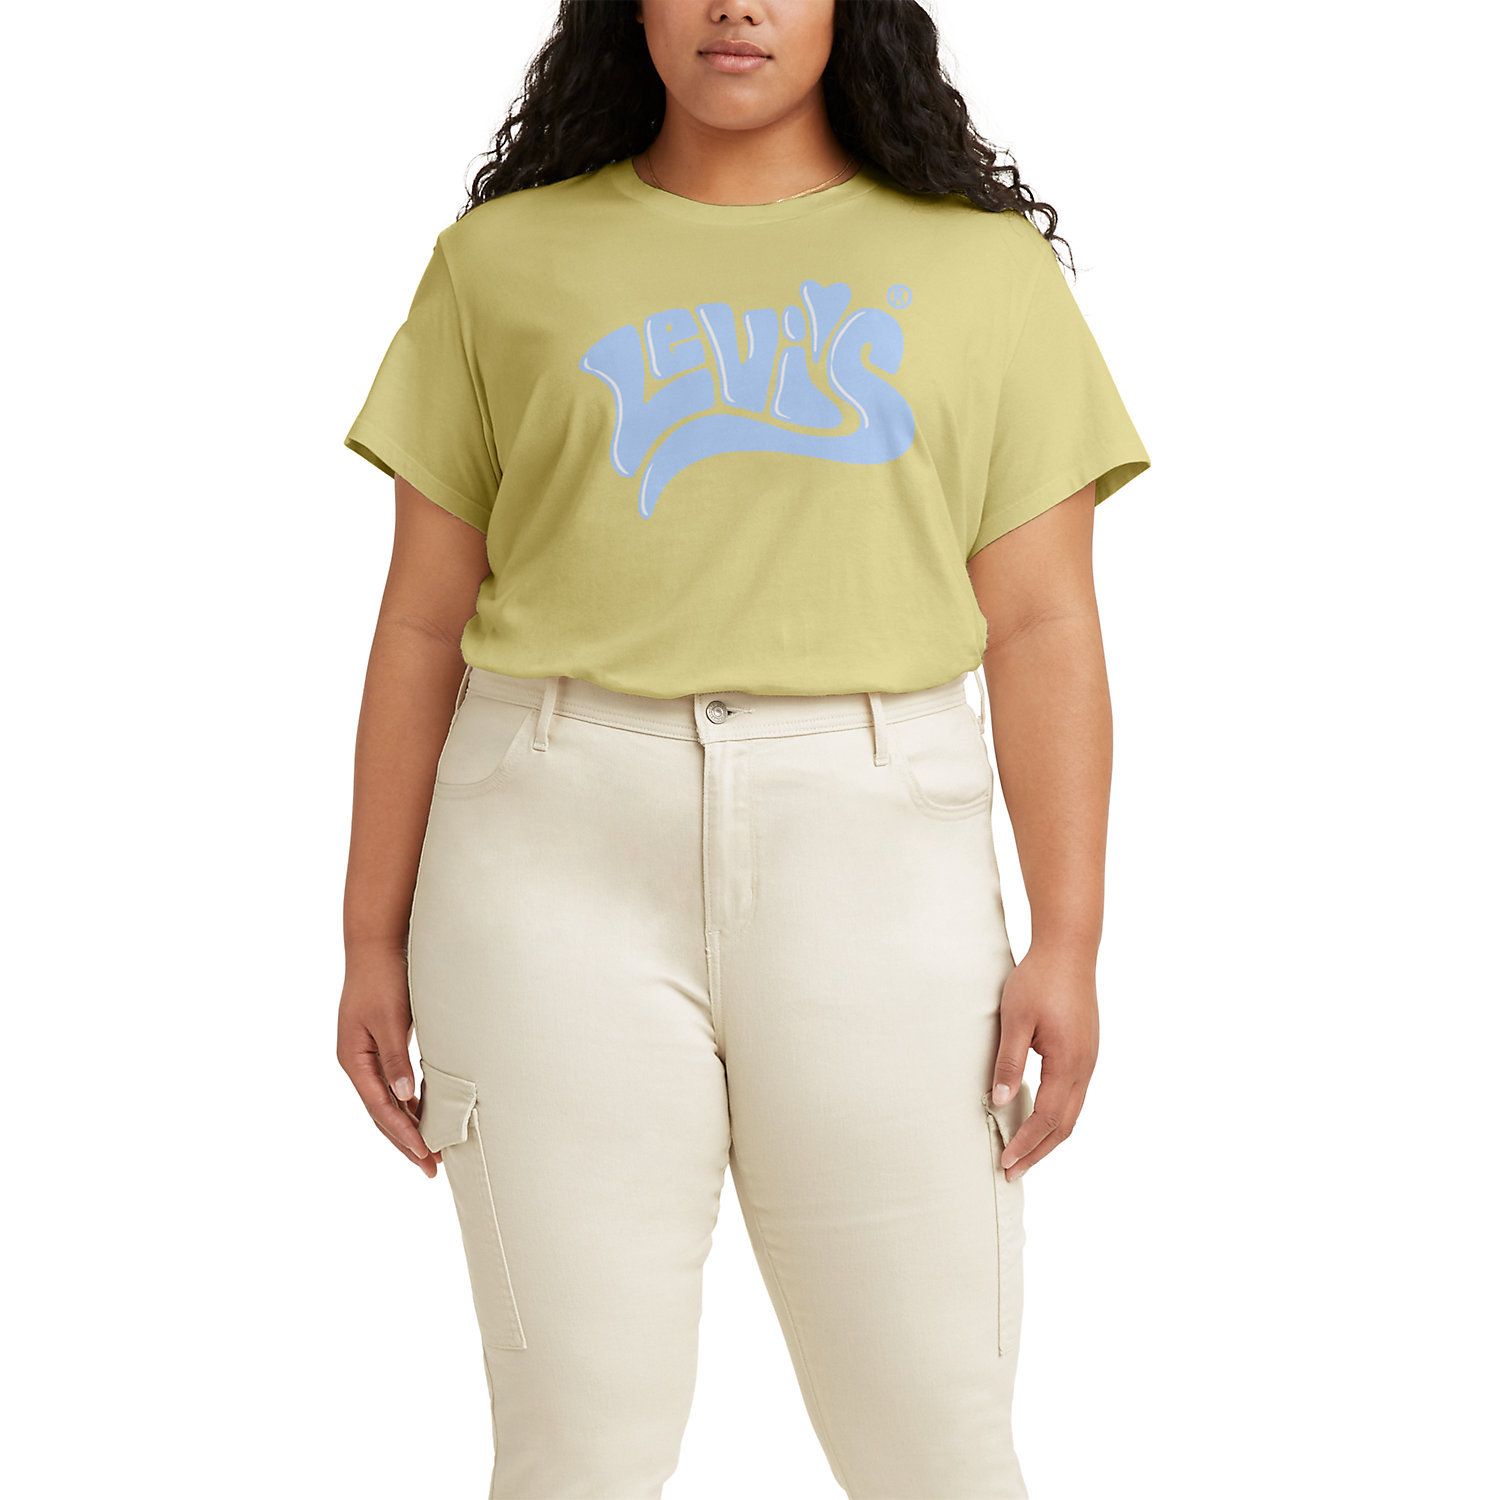 Image for Levi's Plus Size Graphic Varsity Tee at Kohl's.